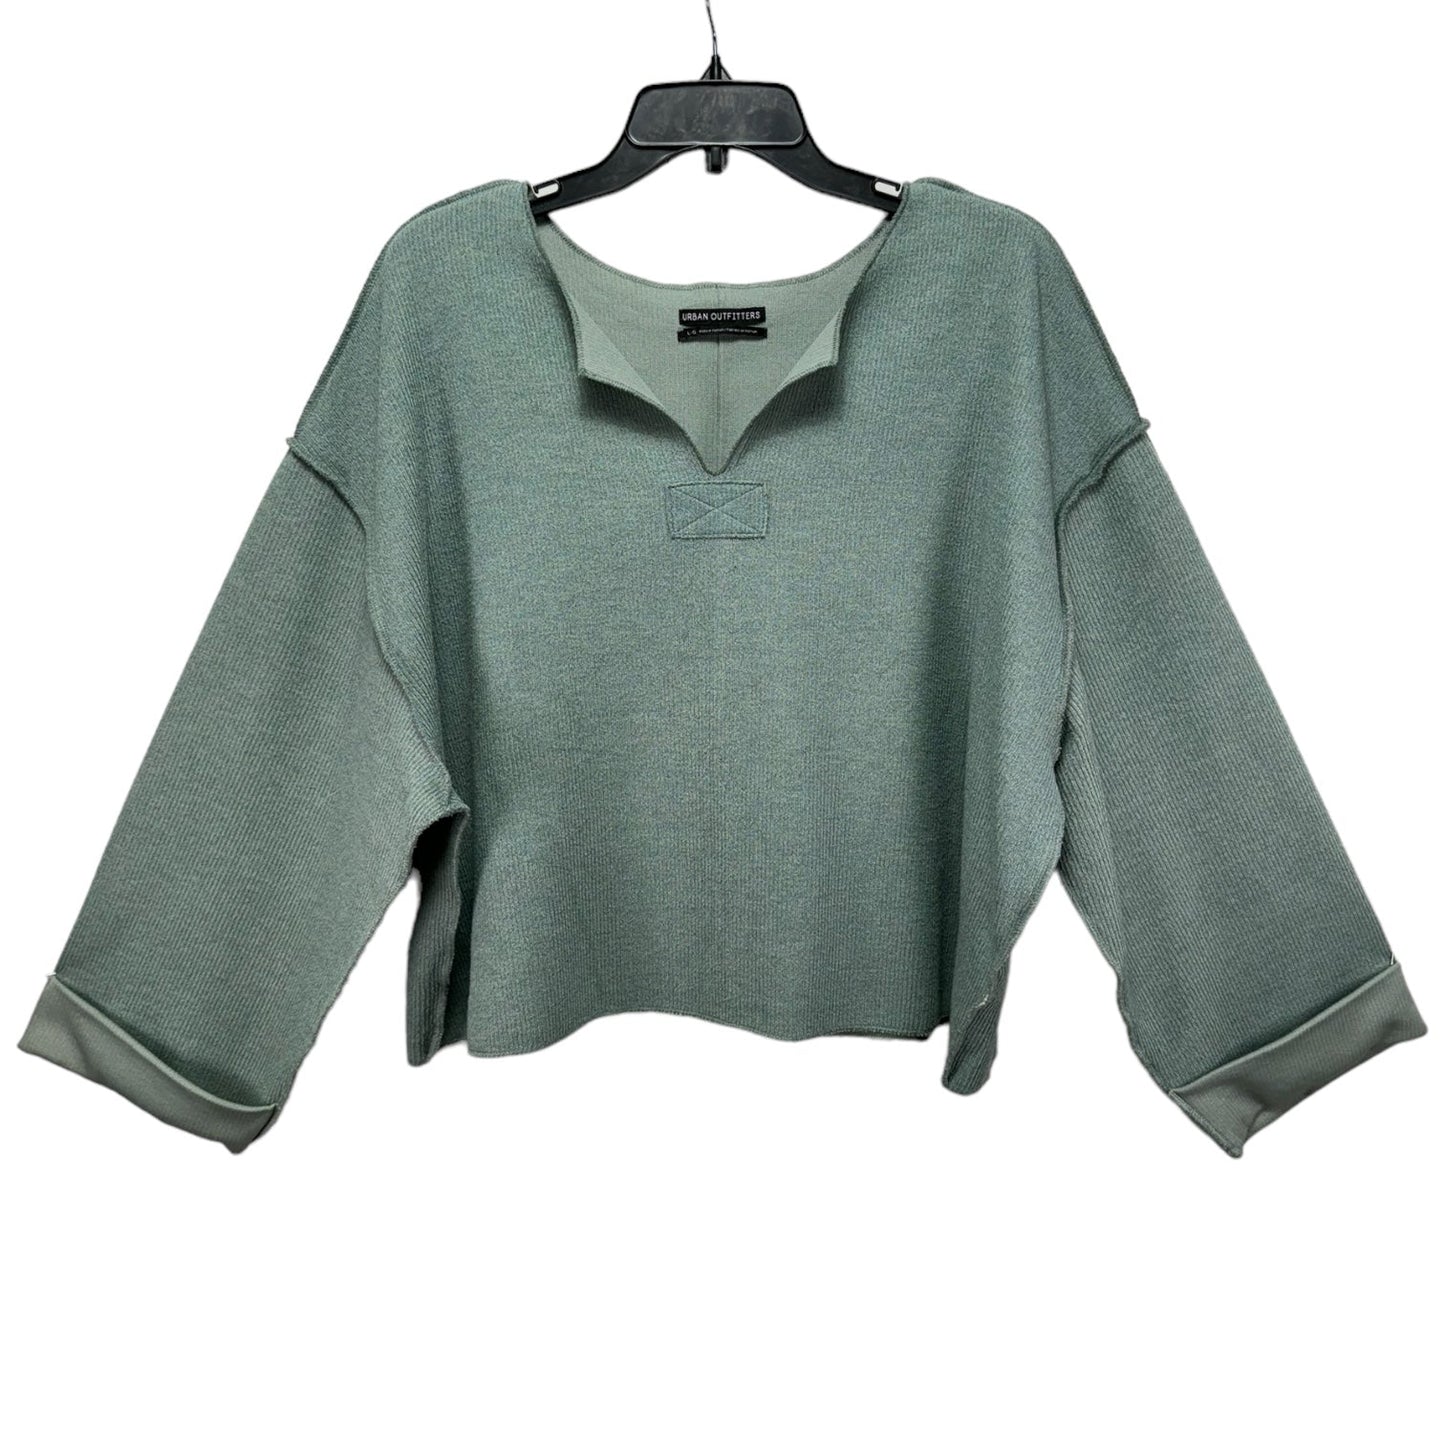 Green Sweater Urban Outfitters, Size L